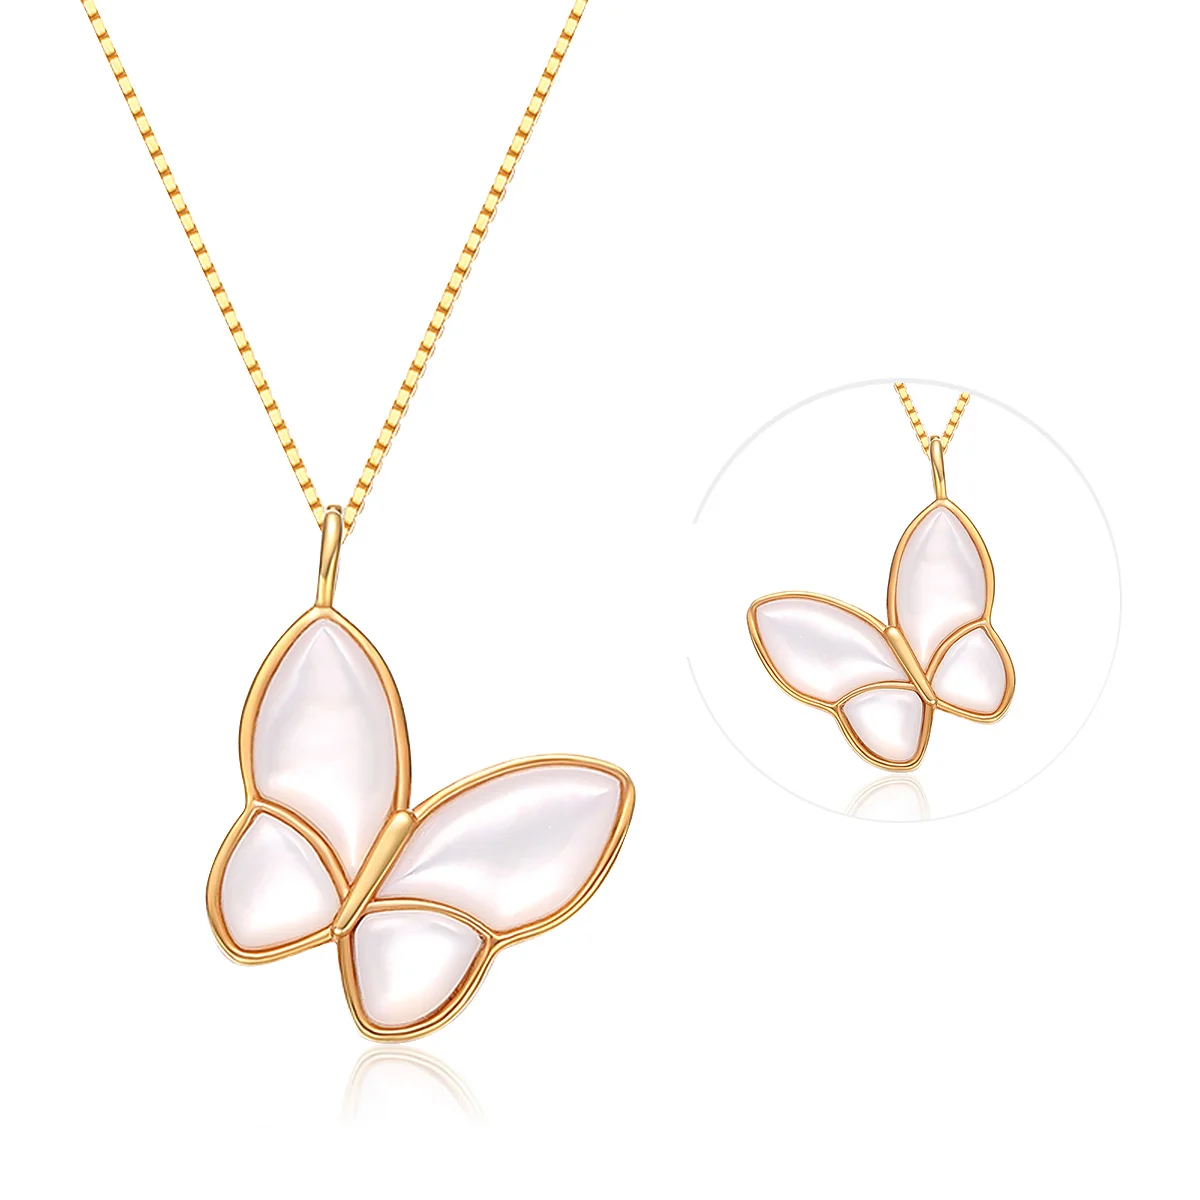 Szjinao Butterfly 3G Hard Gold 585 18K Pendant Natural Fritillary Certified Wedding Jewelry For Women With 925 Silver Necklace D